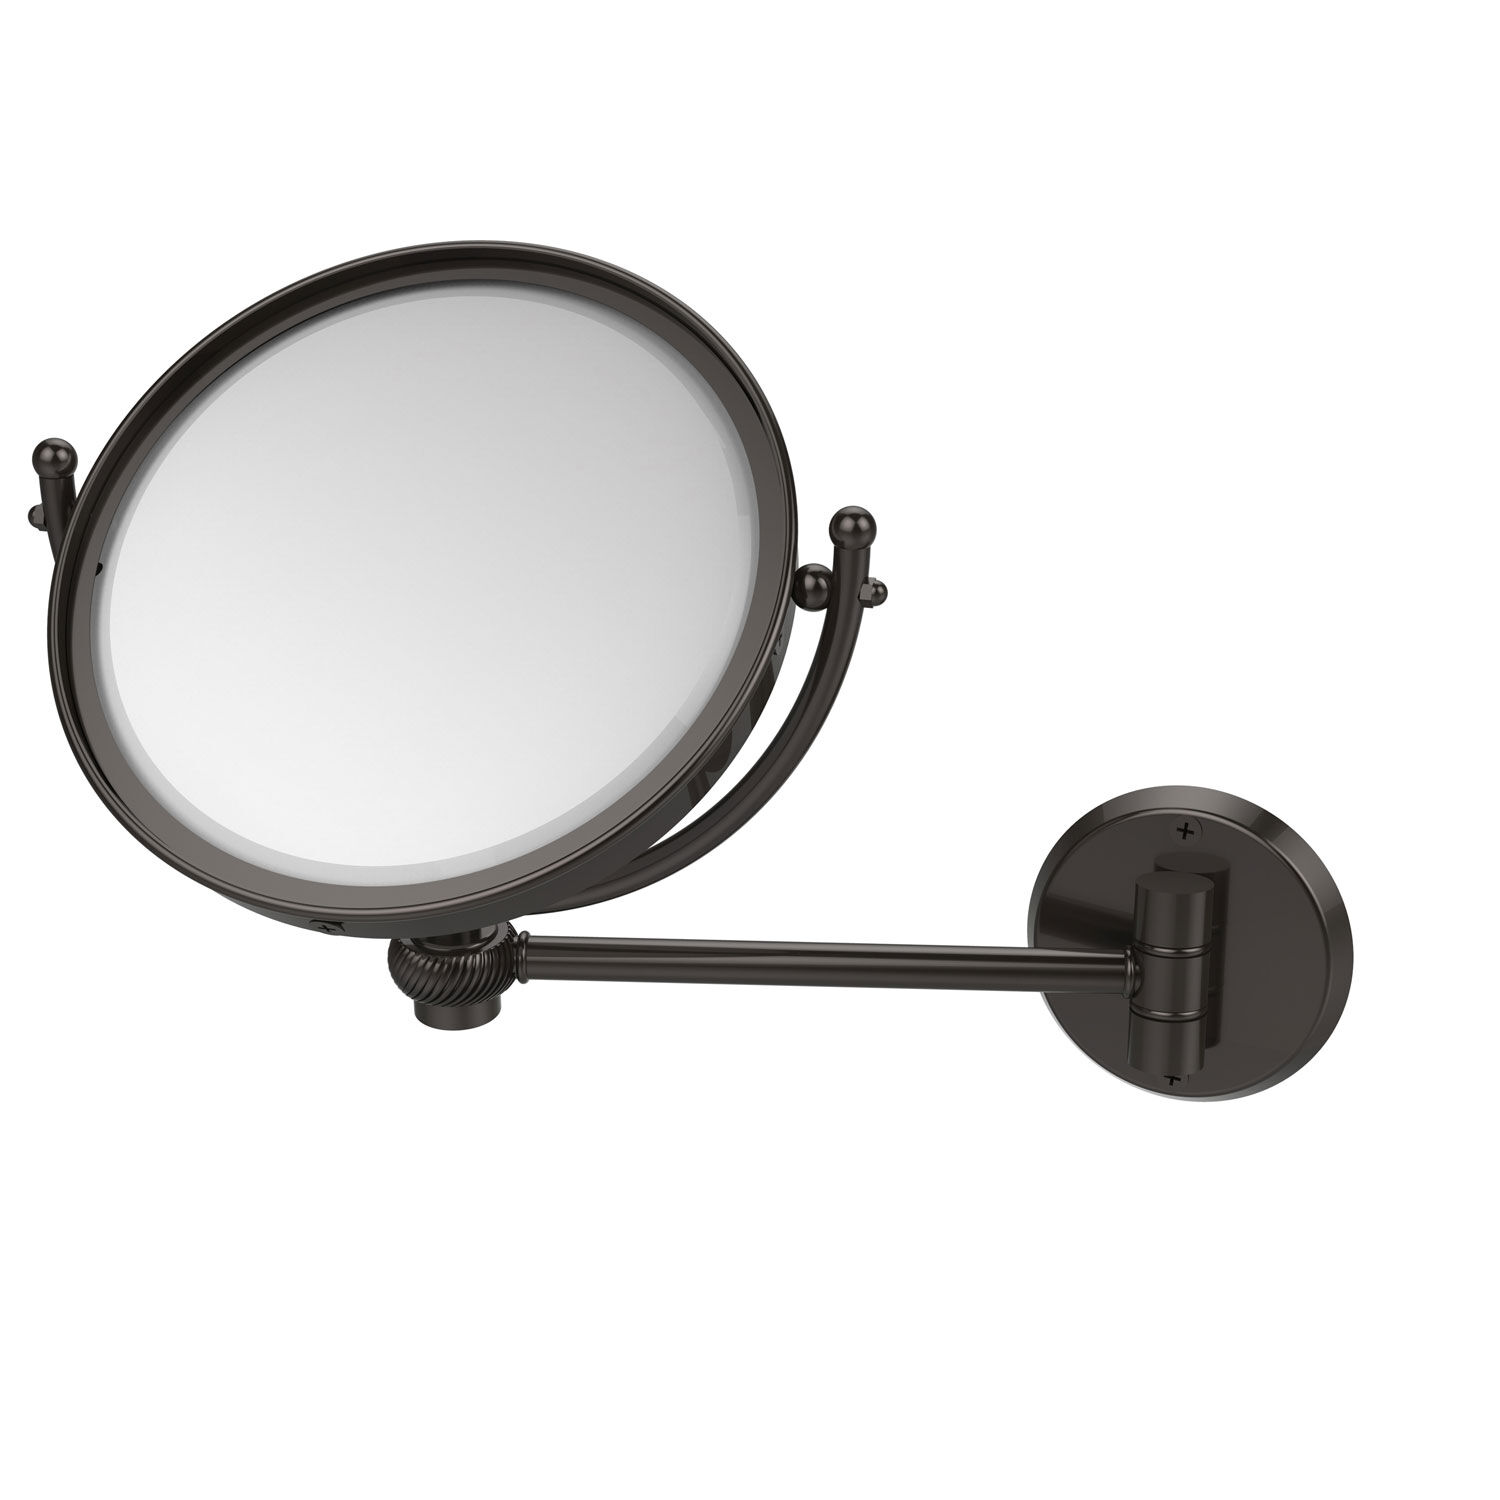 8 Inch Wall Mounted Make-Up Mirror 3X Magnification, Oil Rubbed Bronze